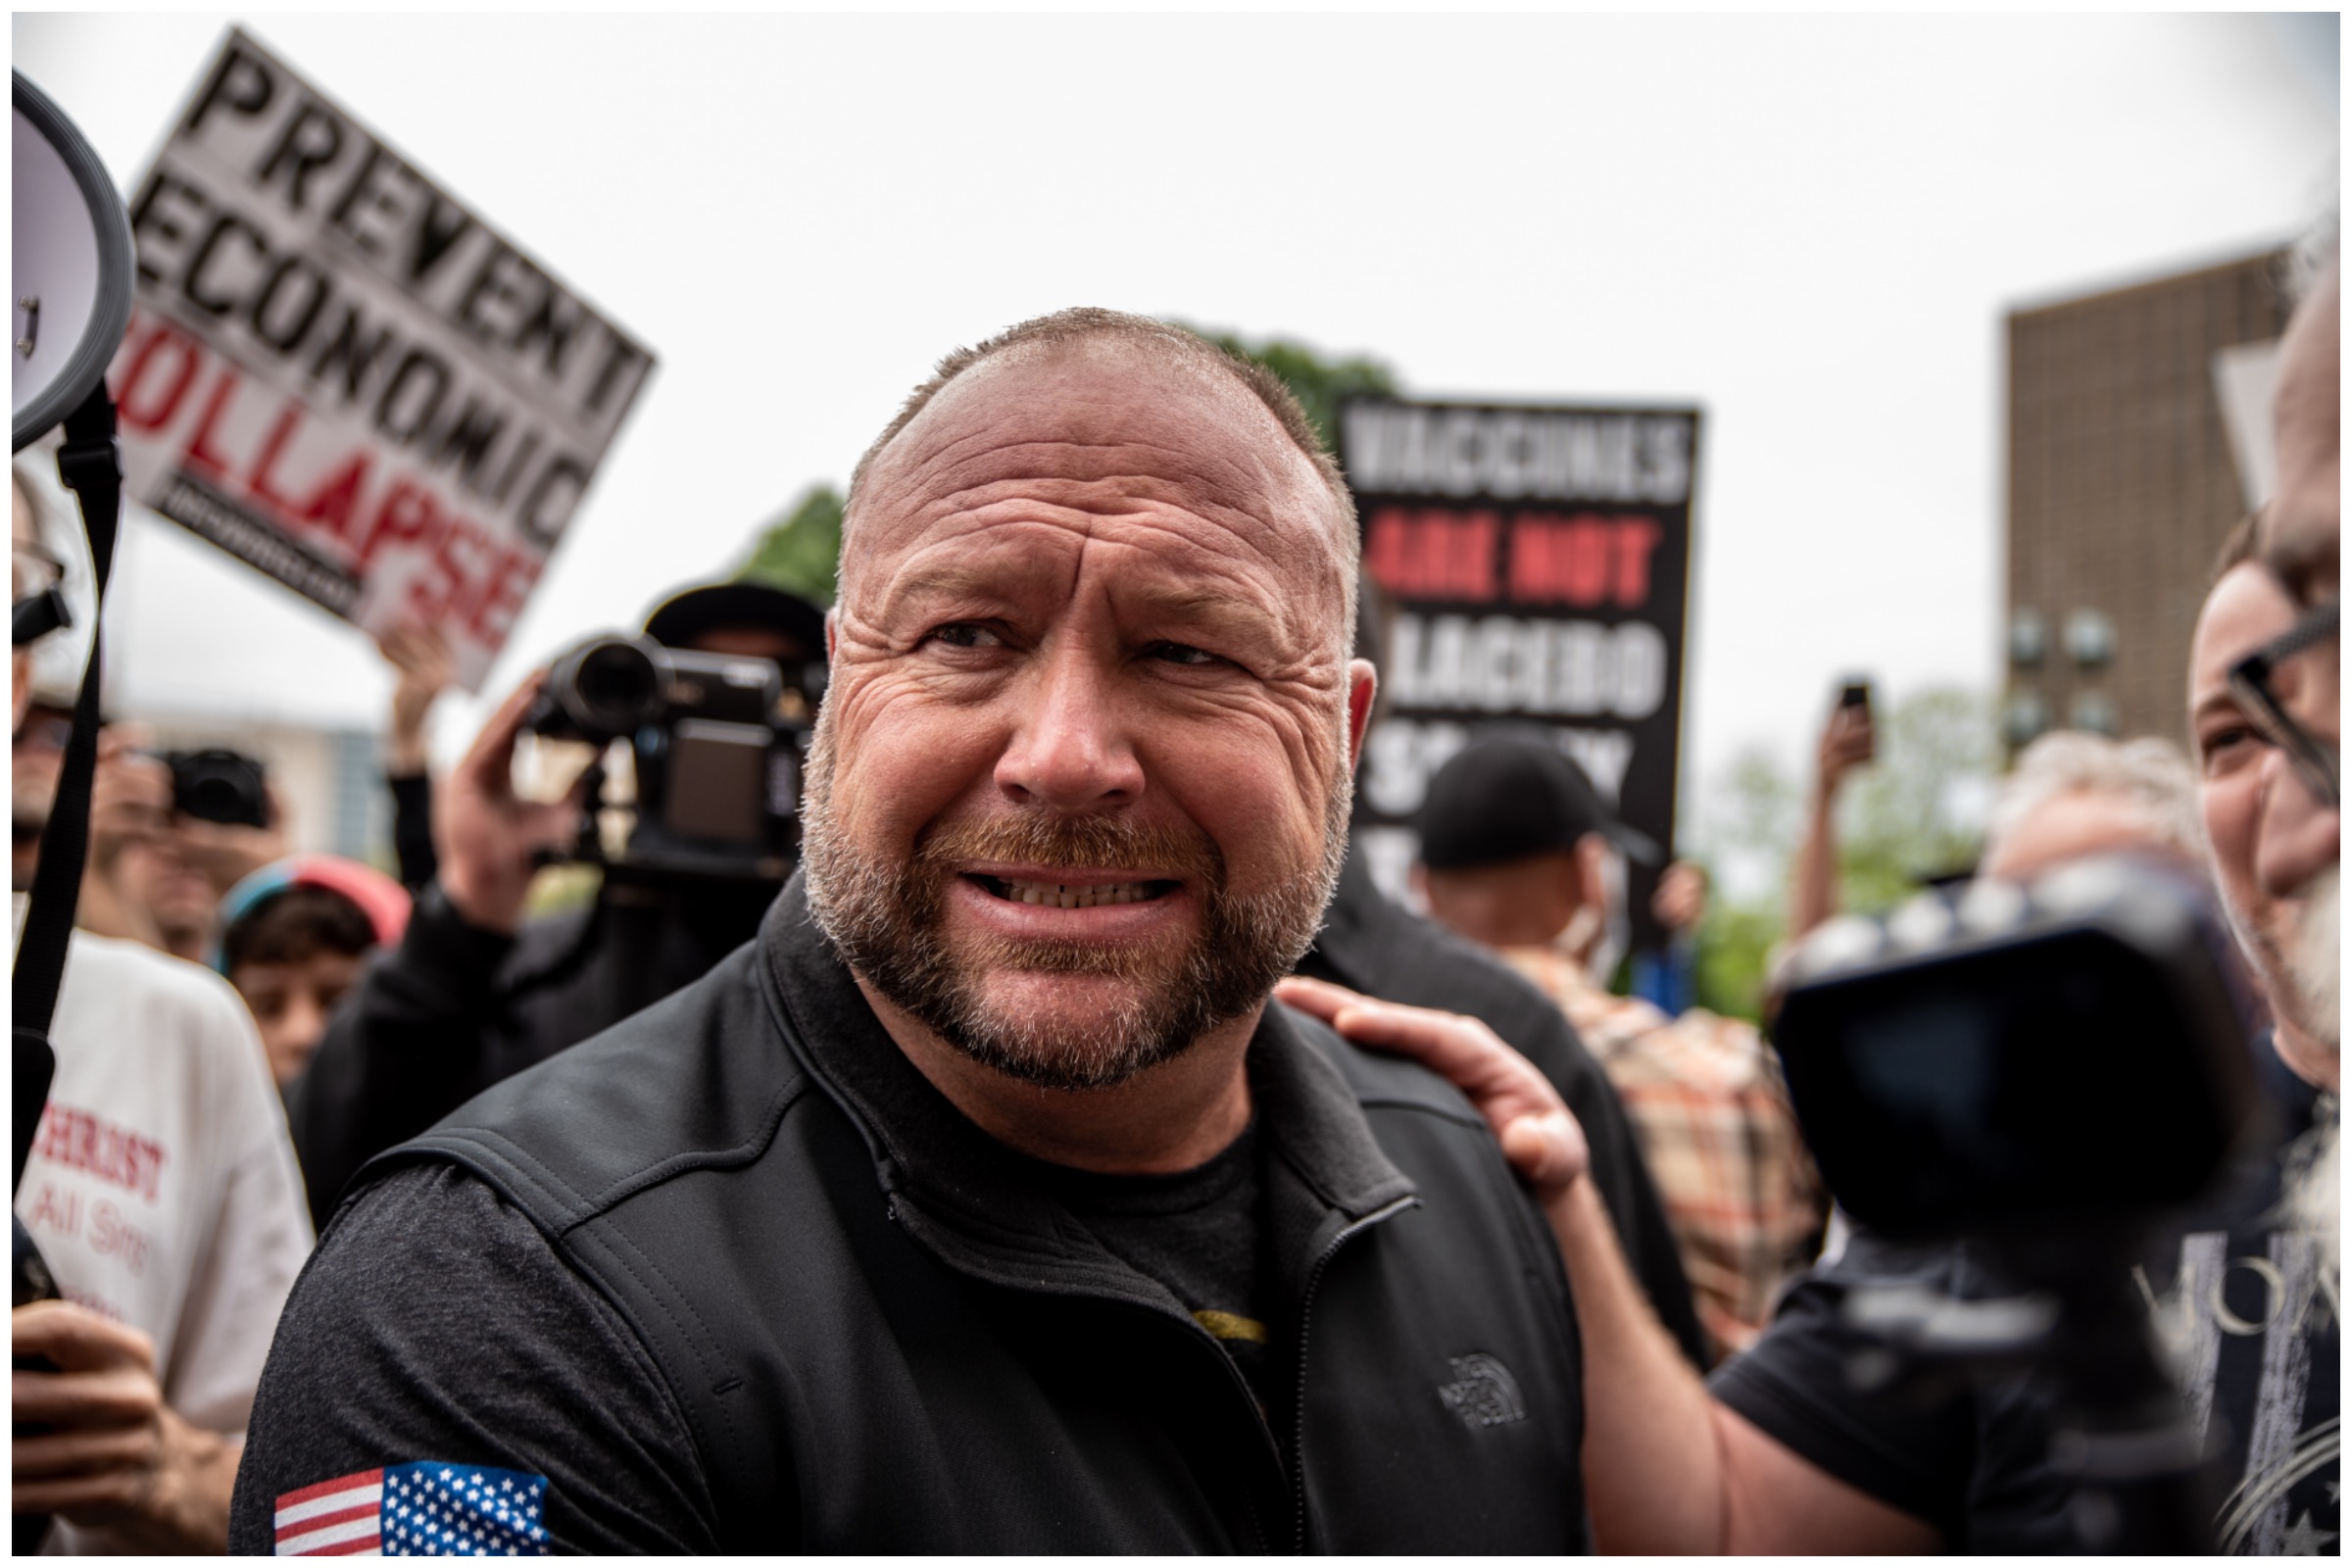 Infowars Files for Bankruptcy as Alex Jones Scrambles for Cover